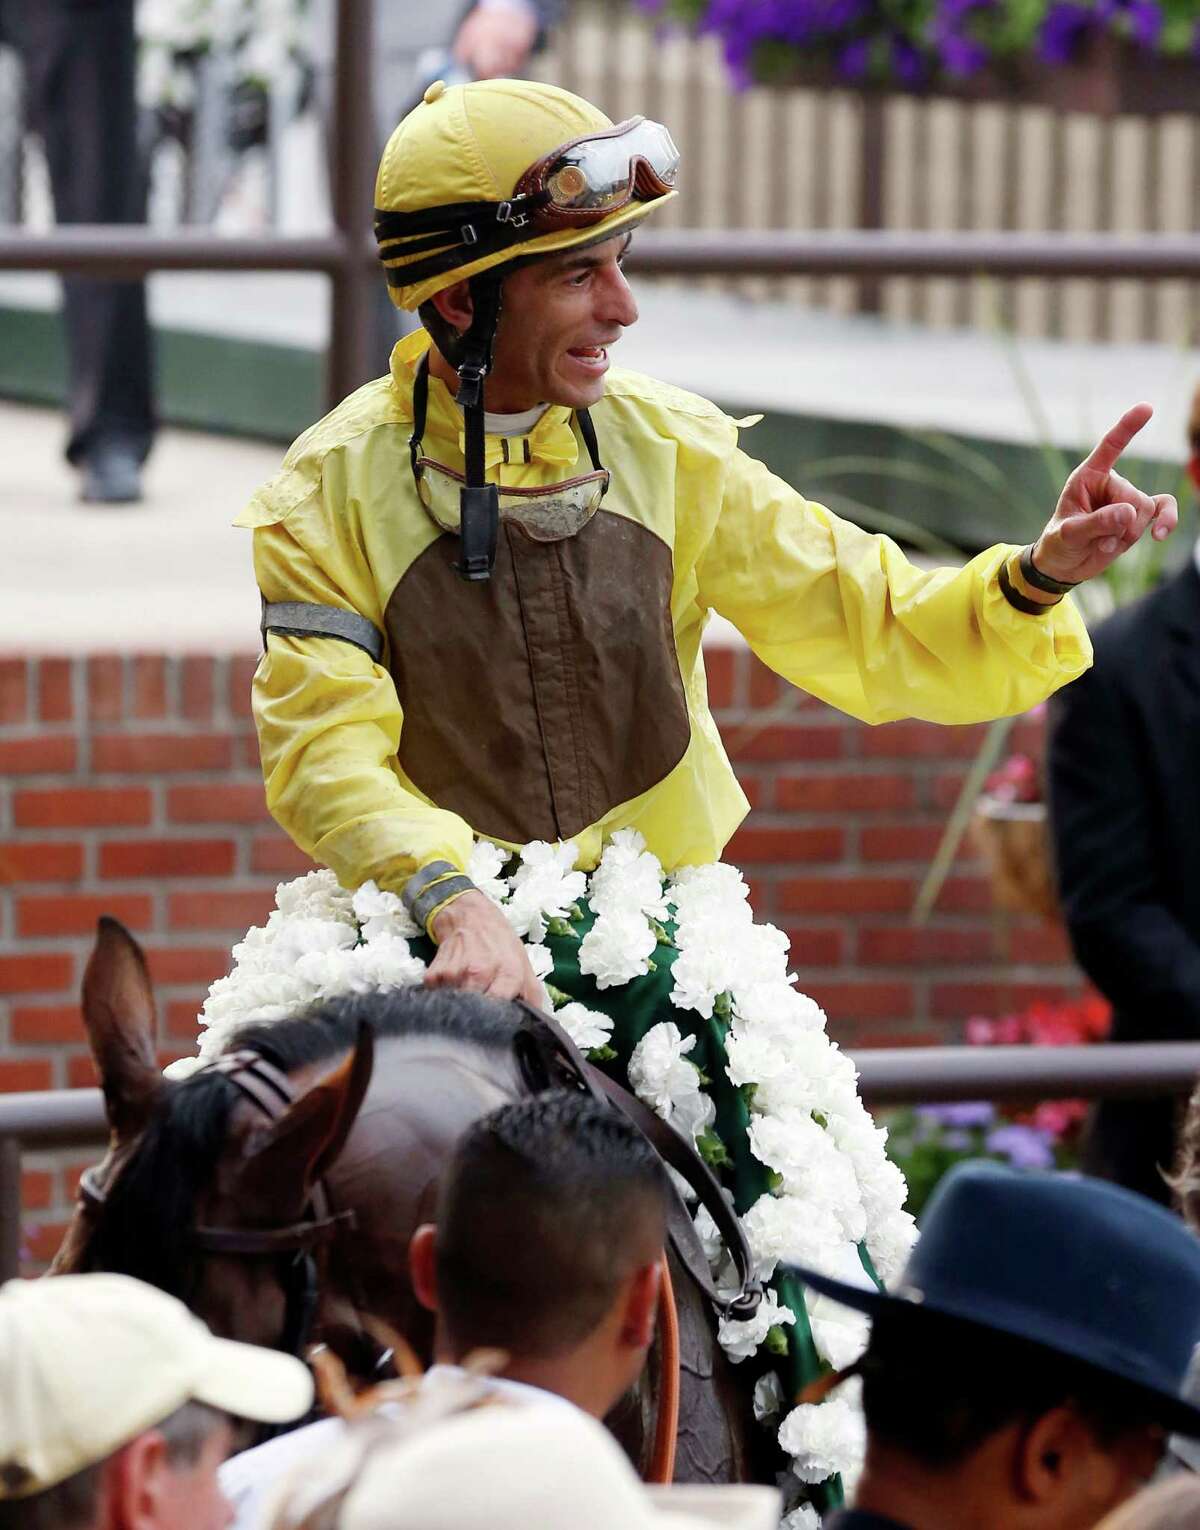 Jockey John Velazquez smiles aboard Union Rags after their win in the Belmont Stakes horse race at Belmont Park in Elmont, N.Y., on Saturday, June 9, 2012. (AP Photo/Mike Groll)